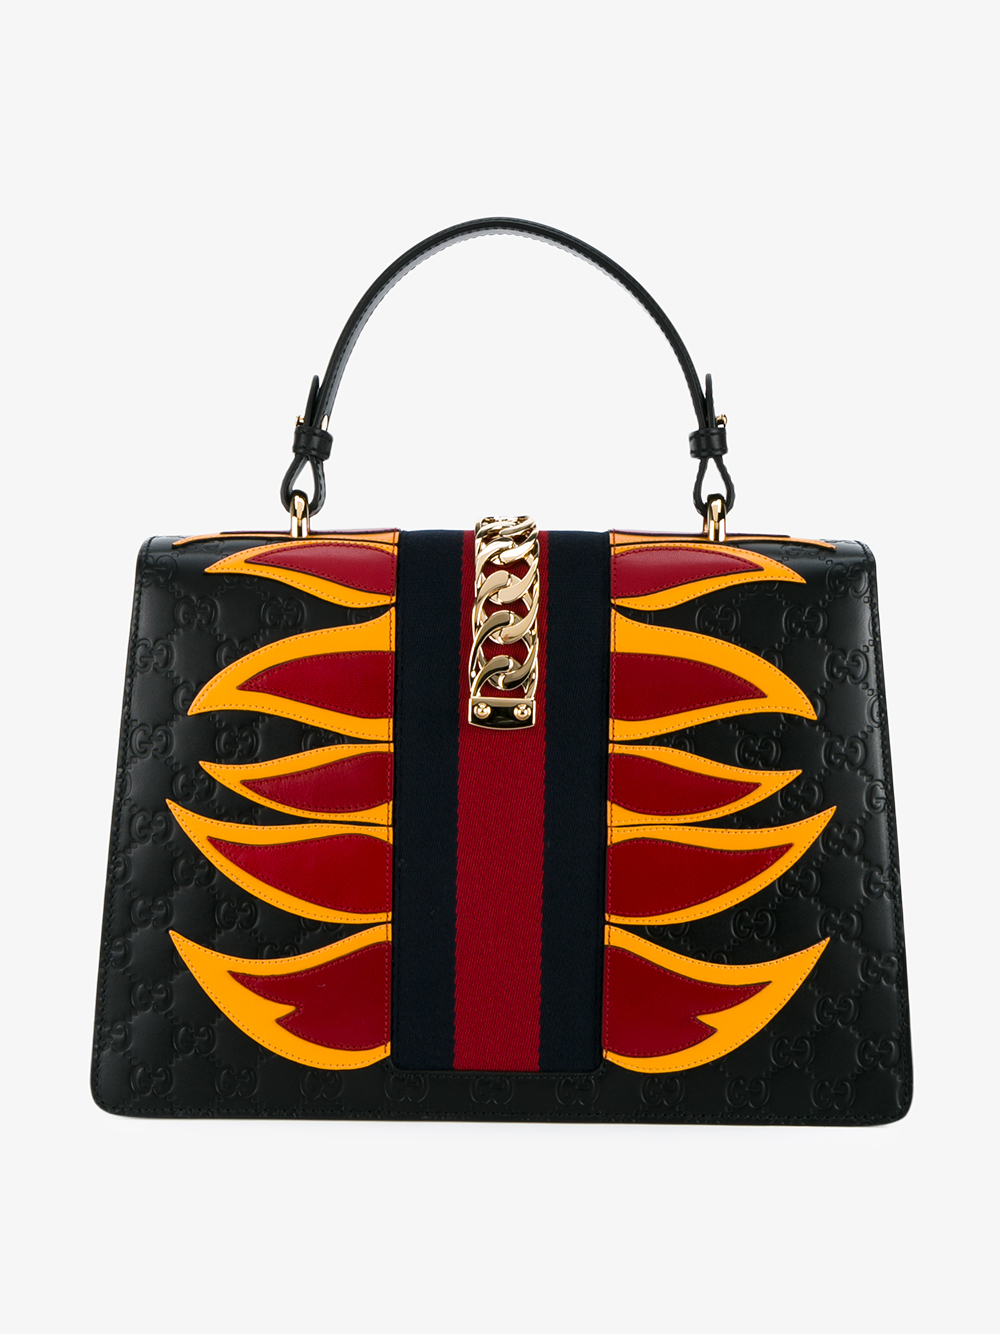 Gucci Sylvie Bag With Flames | Lyst Australia